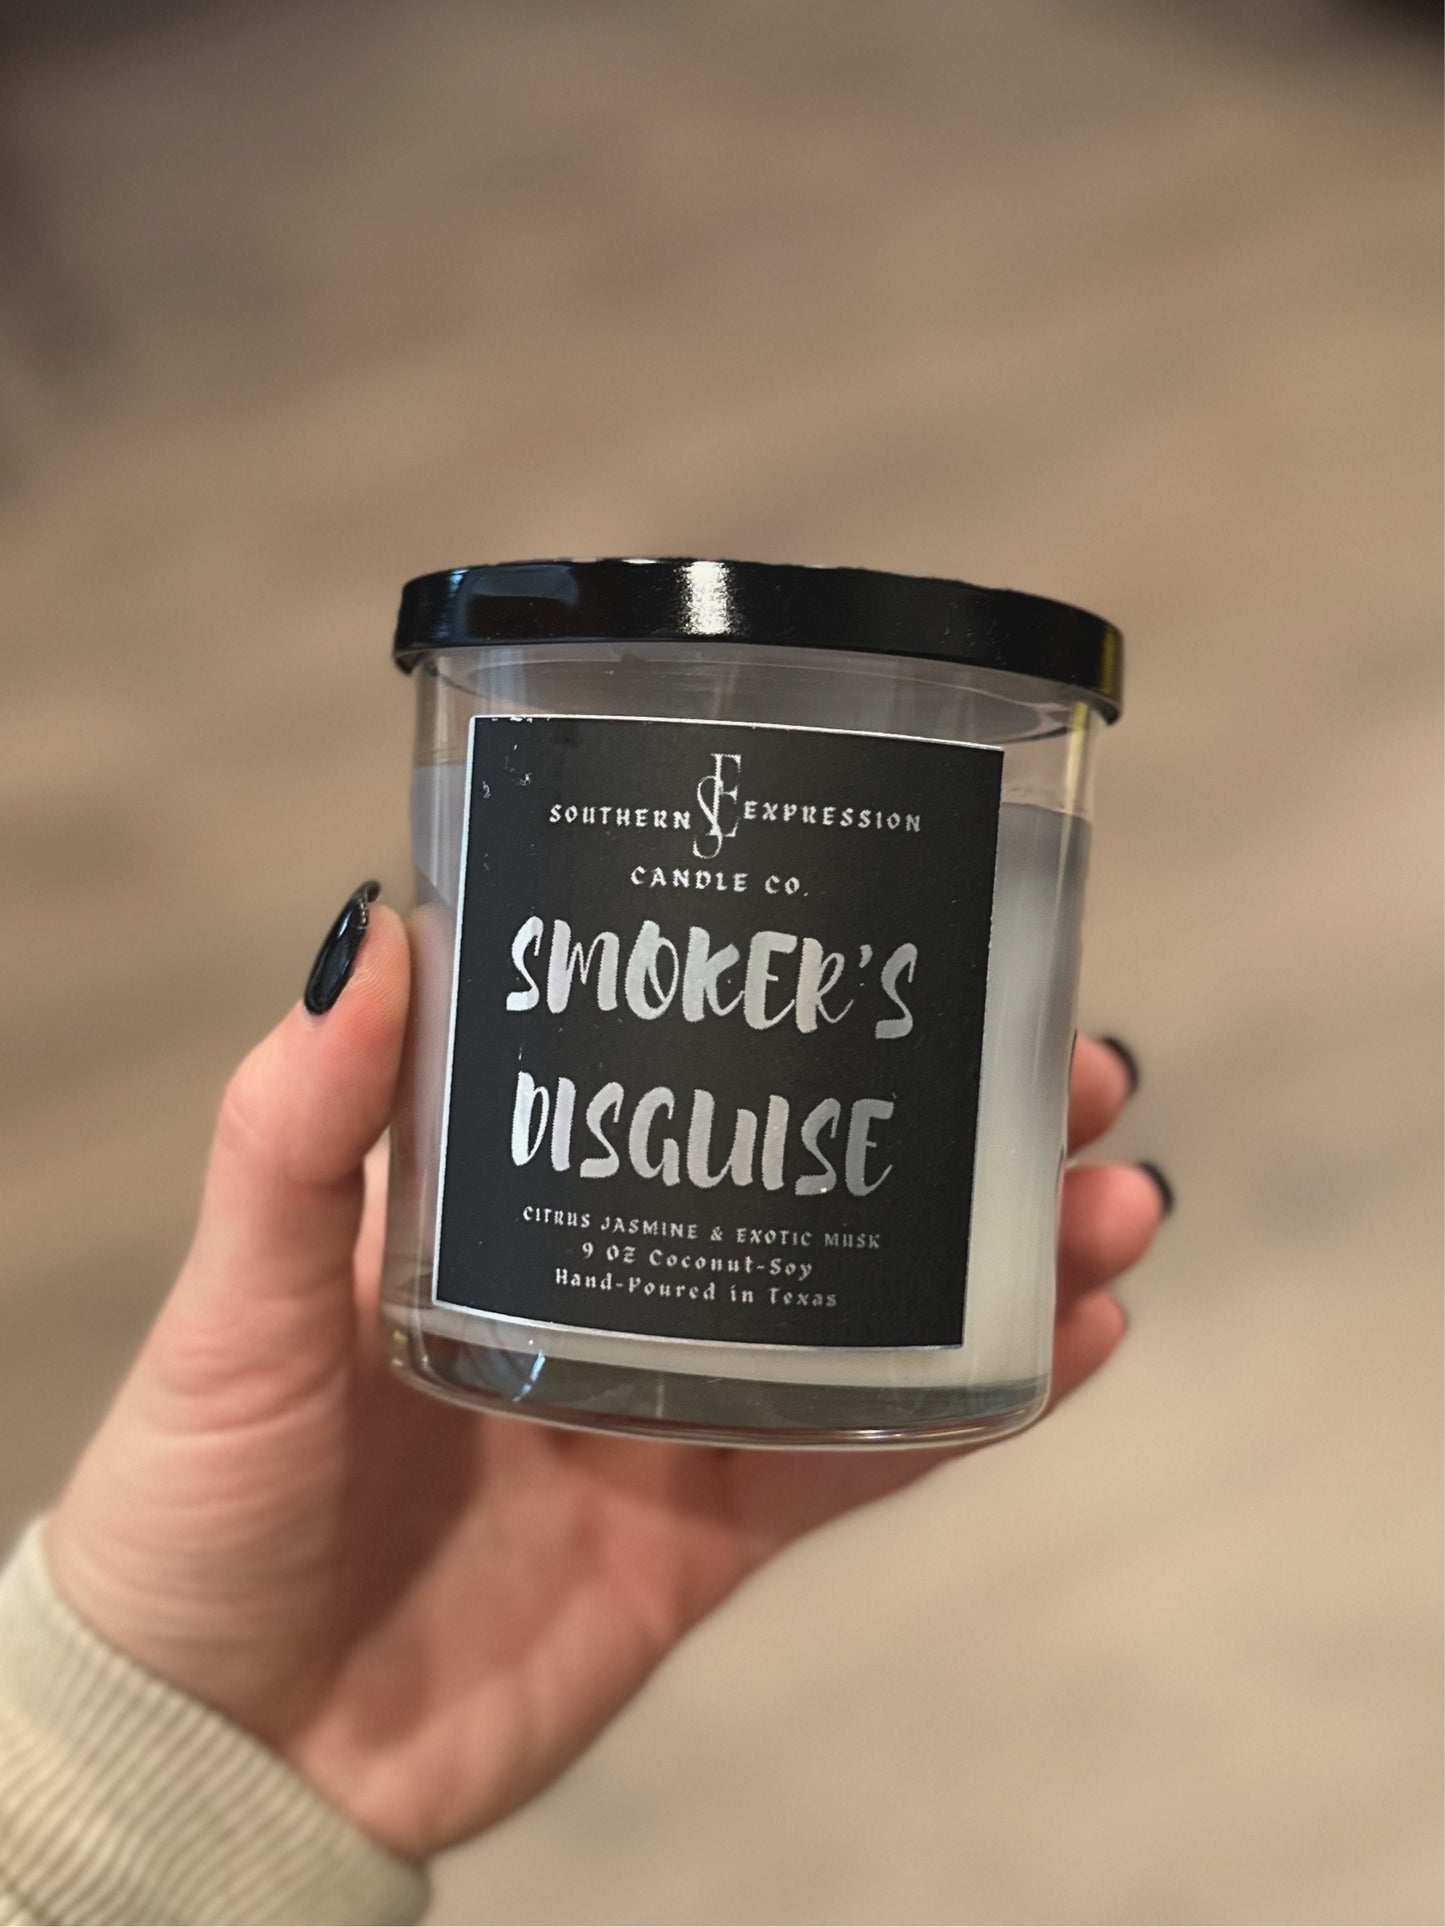 Smoker's Disguise Candle